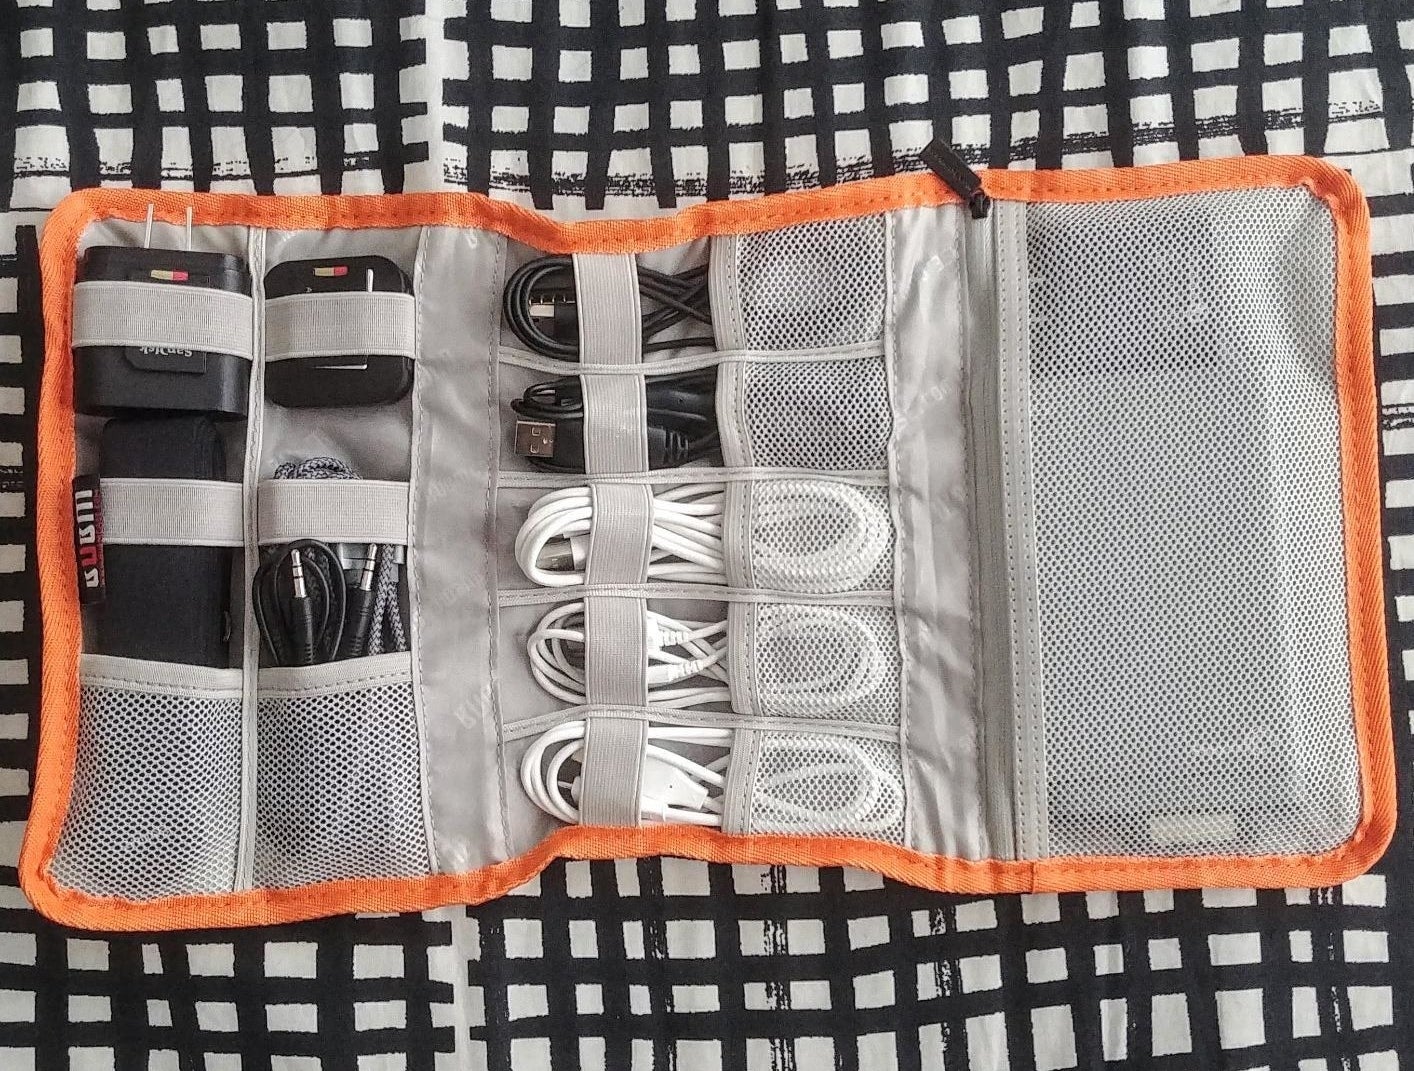 reviewer&#x27;s organizer with different rolled up cords and plugs inside of the compartments 